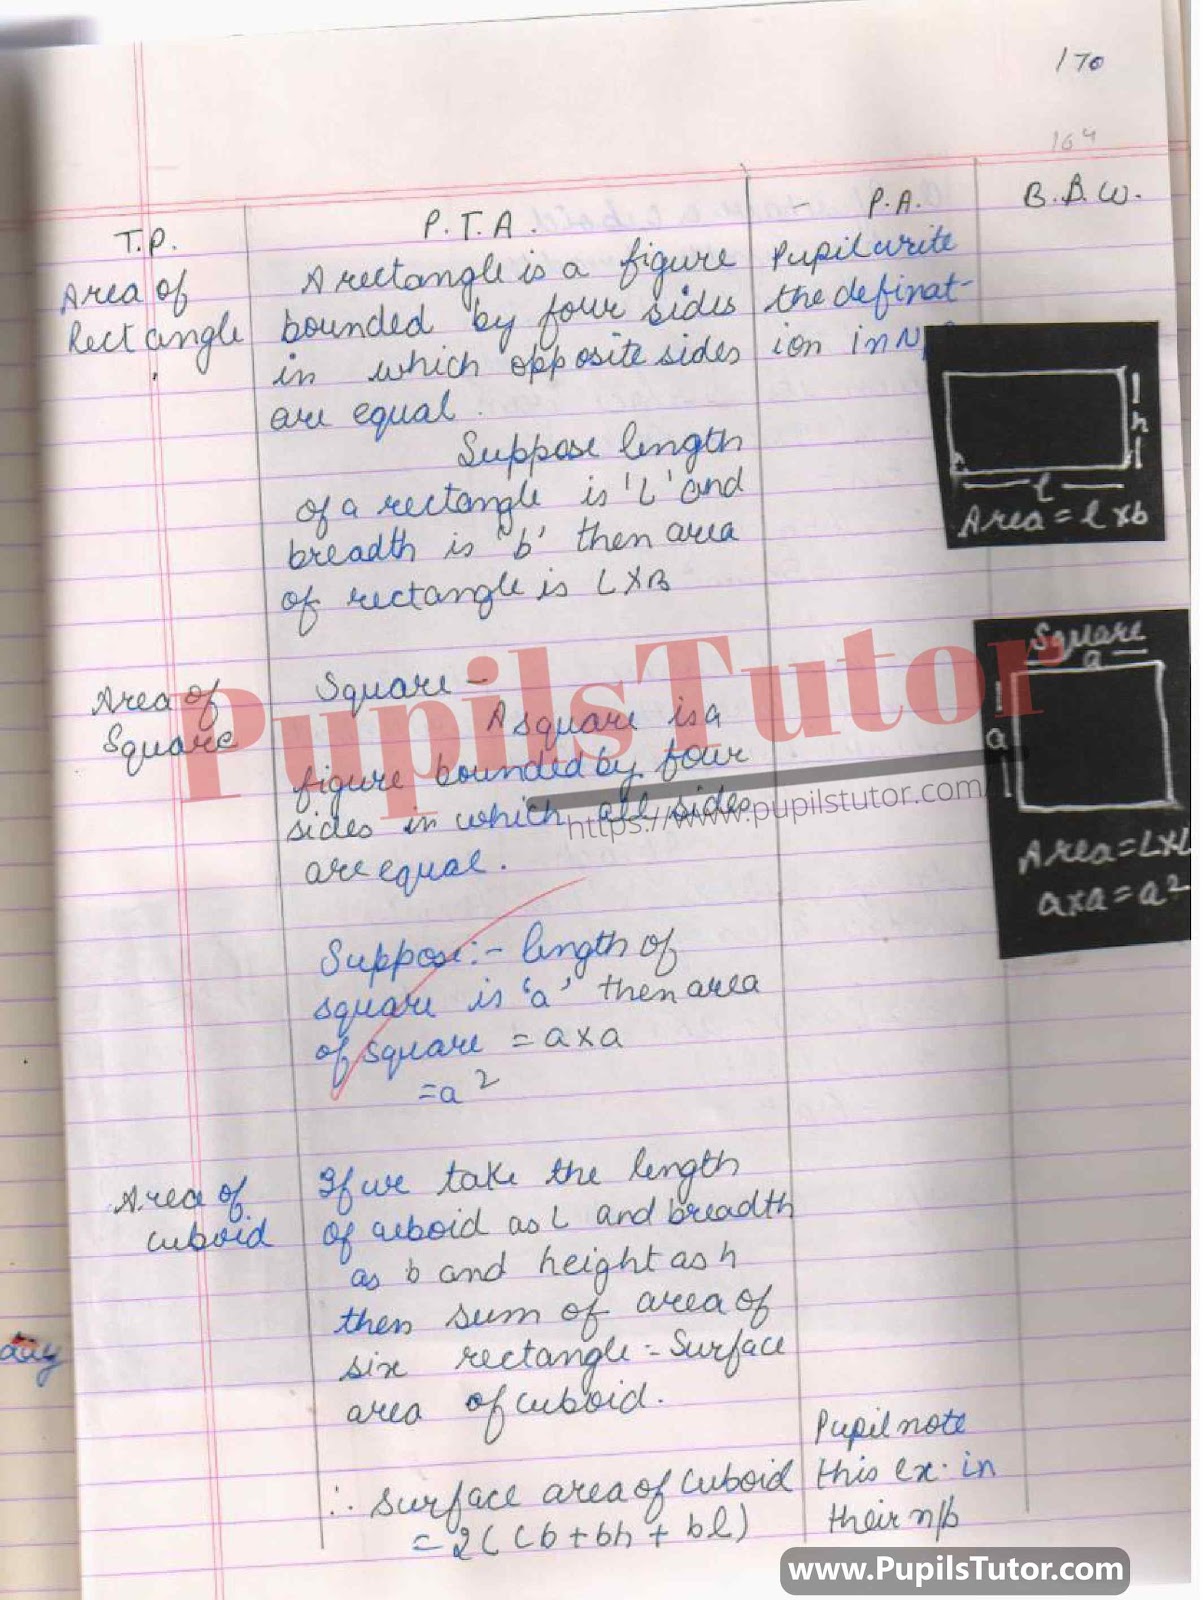 Mathematics Lesson Plan On Surface Area Of Cube And Cuboid For Class/Grade 8, 9 For CBSE NCERT School And College Teachers  – (Page And Image Number 3) – www.pupilstutor.com